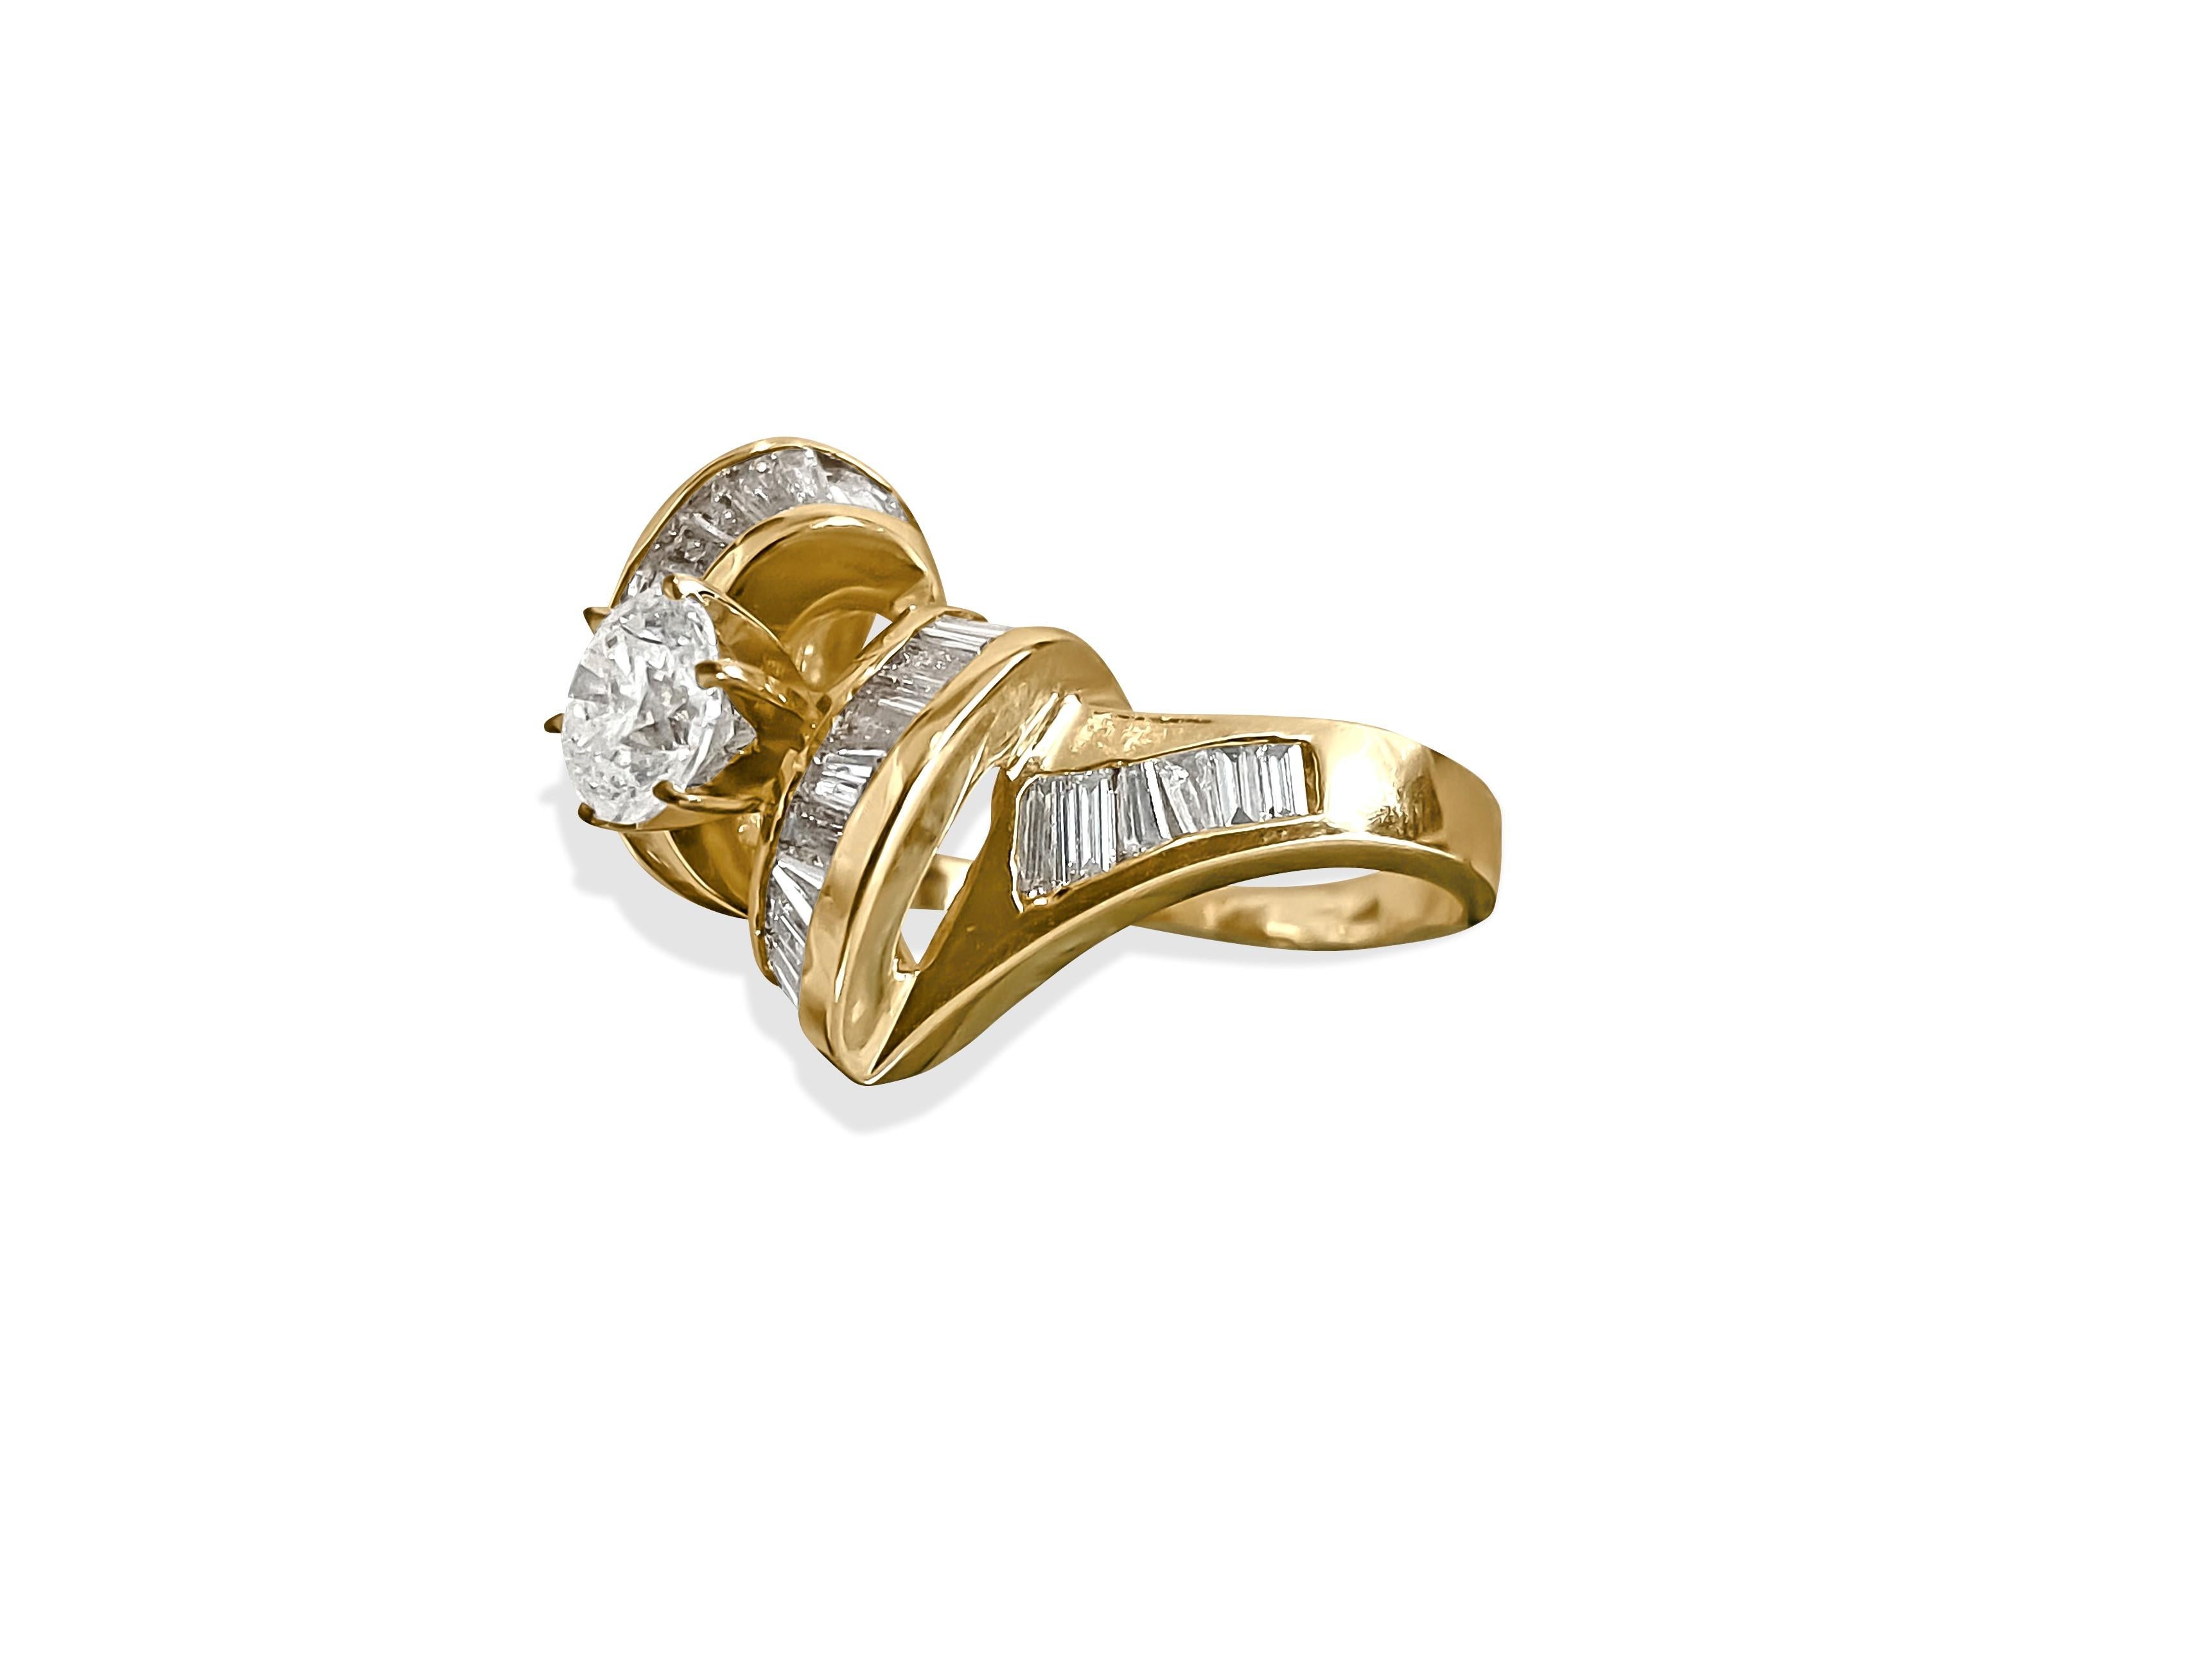 This vintage-style art deco ring features a stunning combination of diamonds set in 14K yellow gold. The centerpiece is a dazzling 1.00 carat round brilliant cut diamond with G color and I2-I3 clarity, complemented by 2.00 carats of baguette-cut